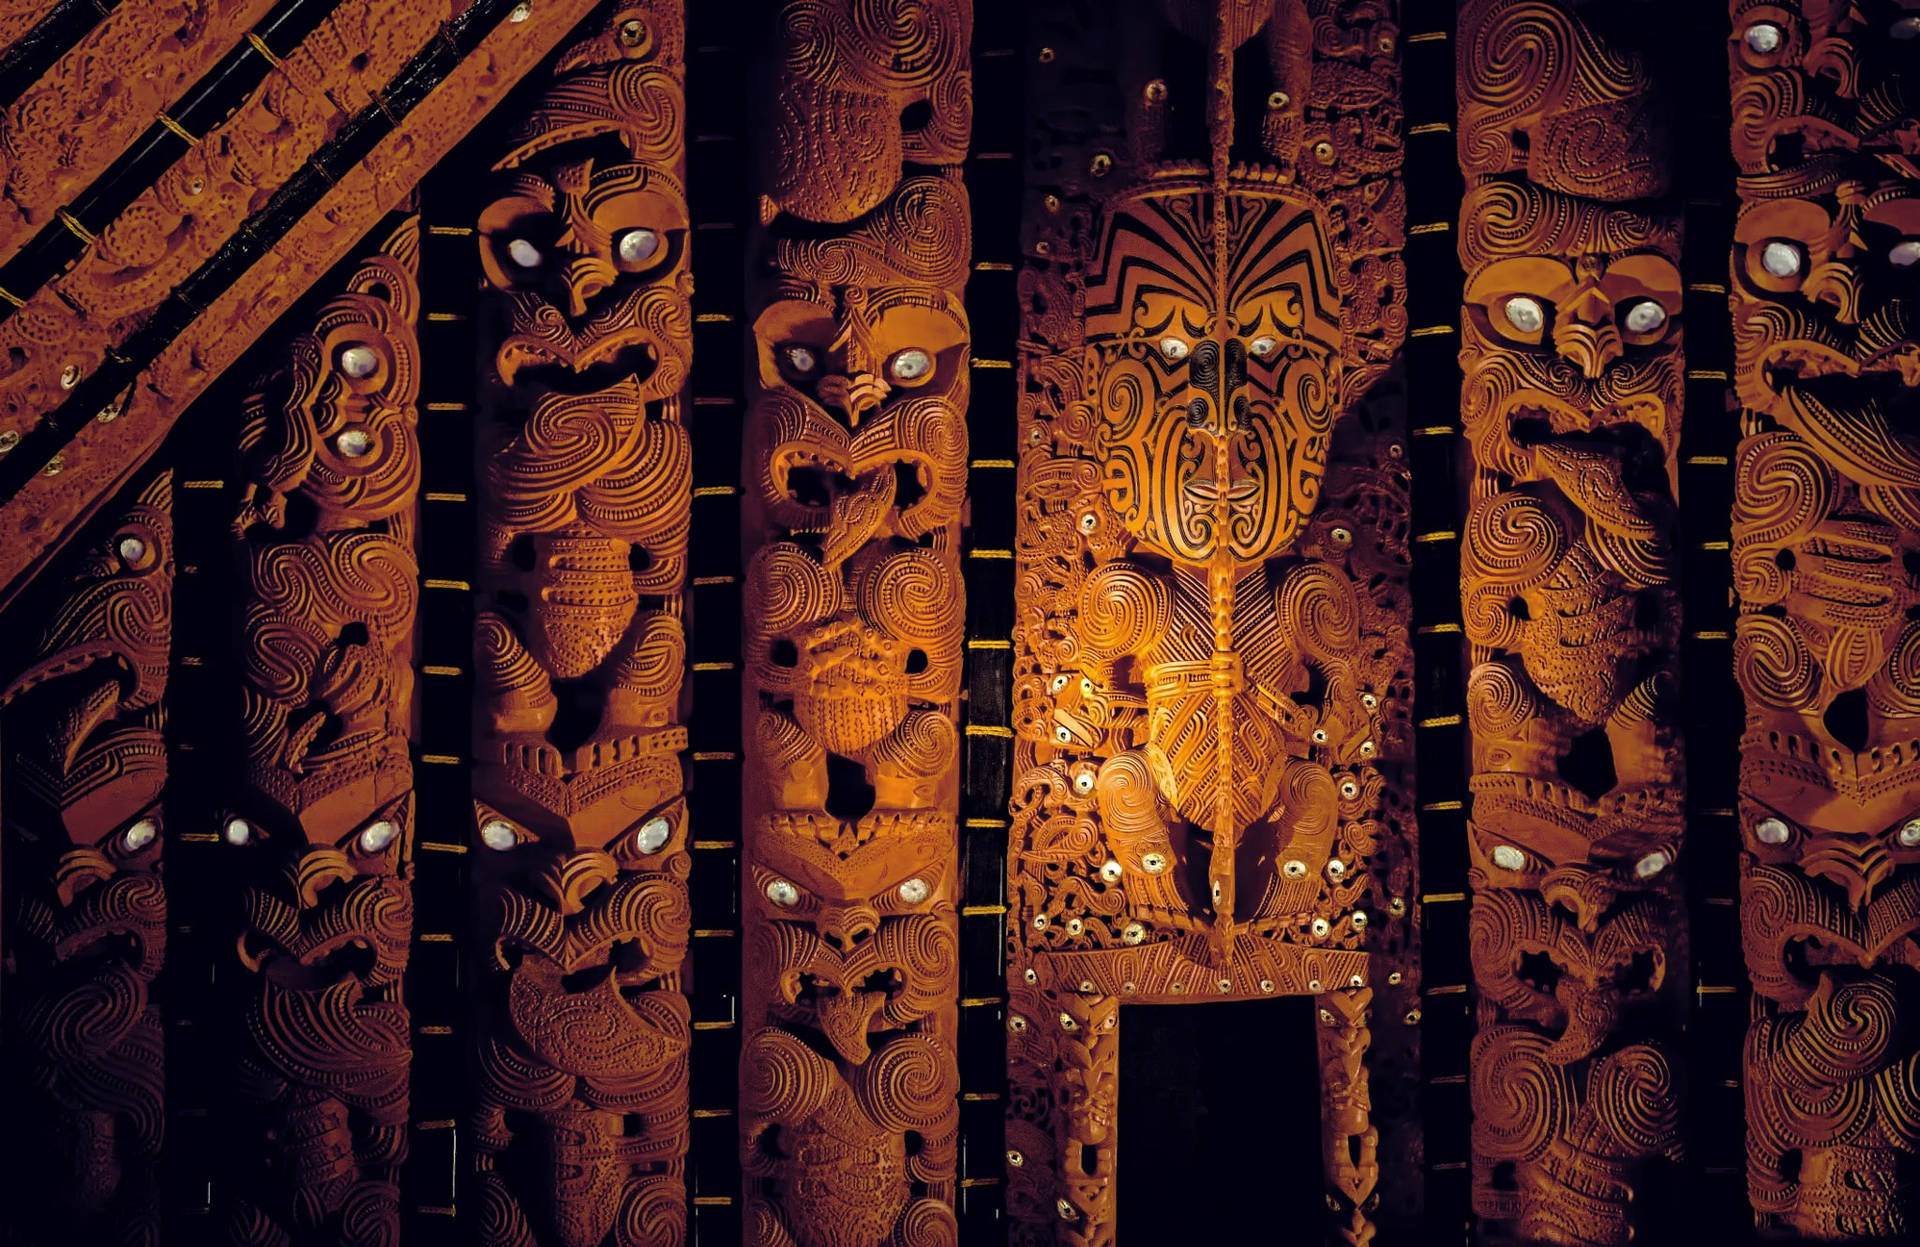 Caption: Intricate Maori Carvings In New Zealand Background